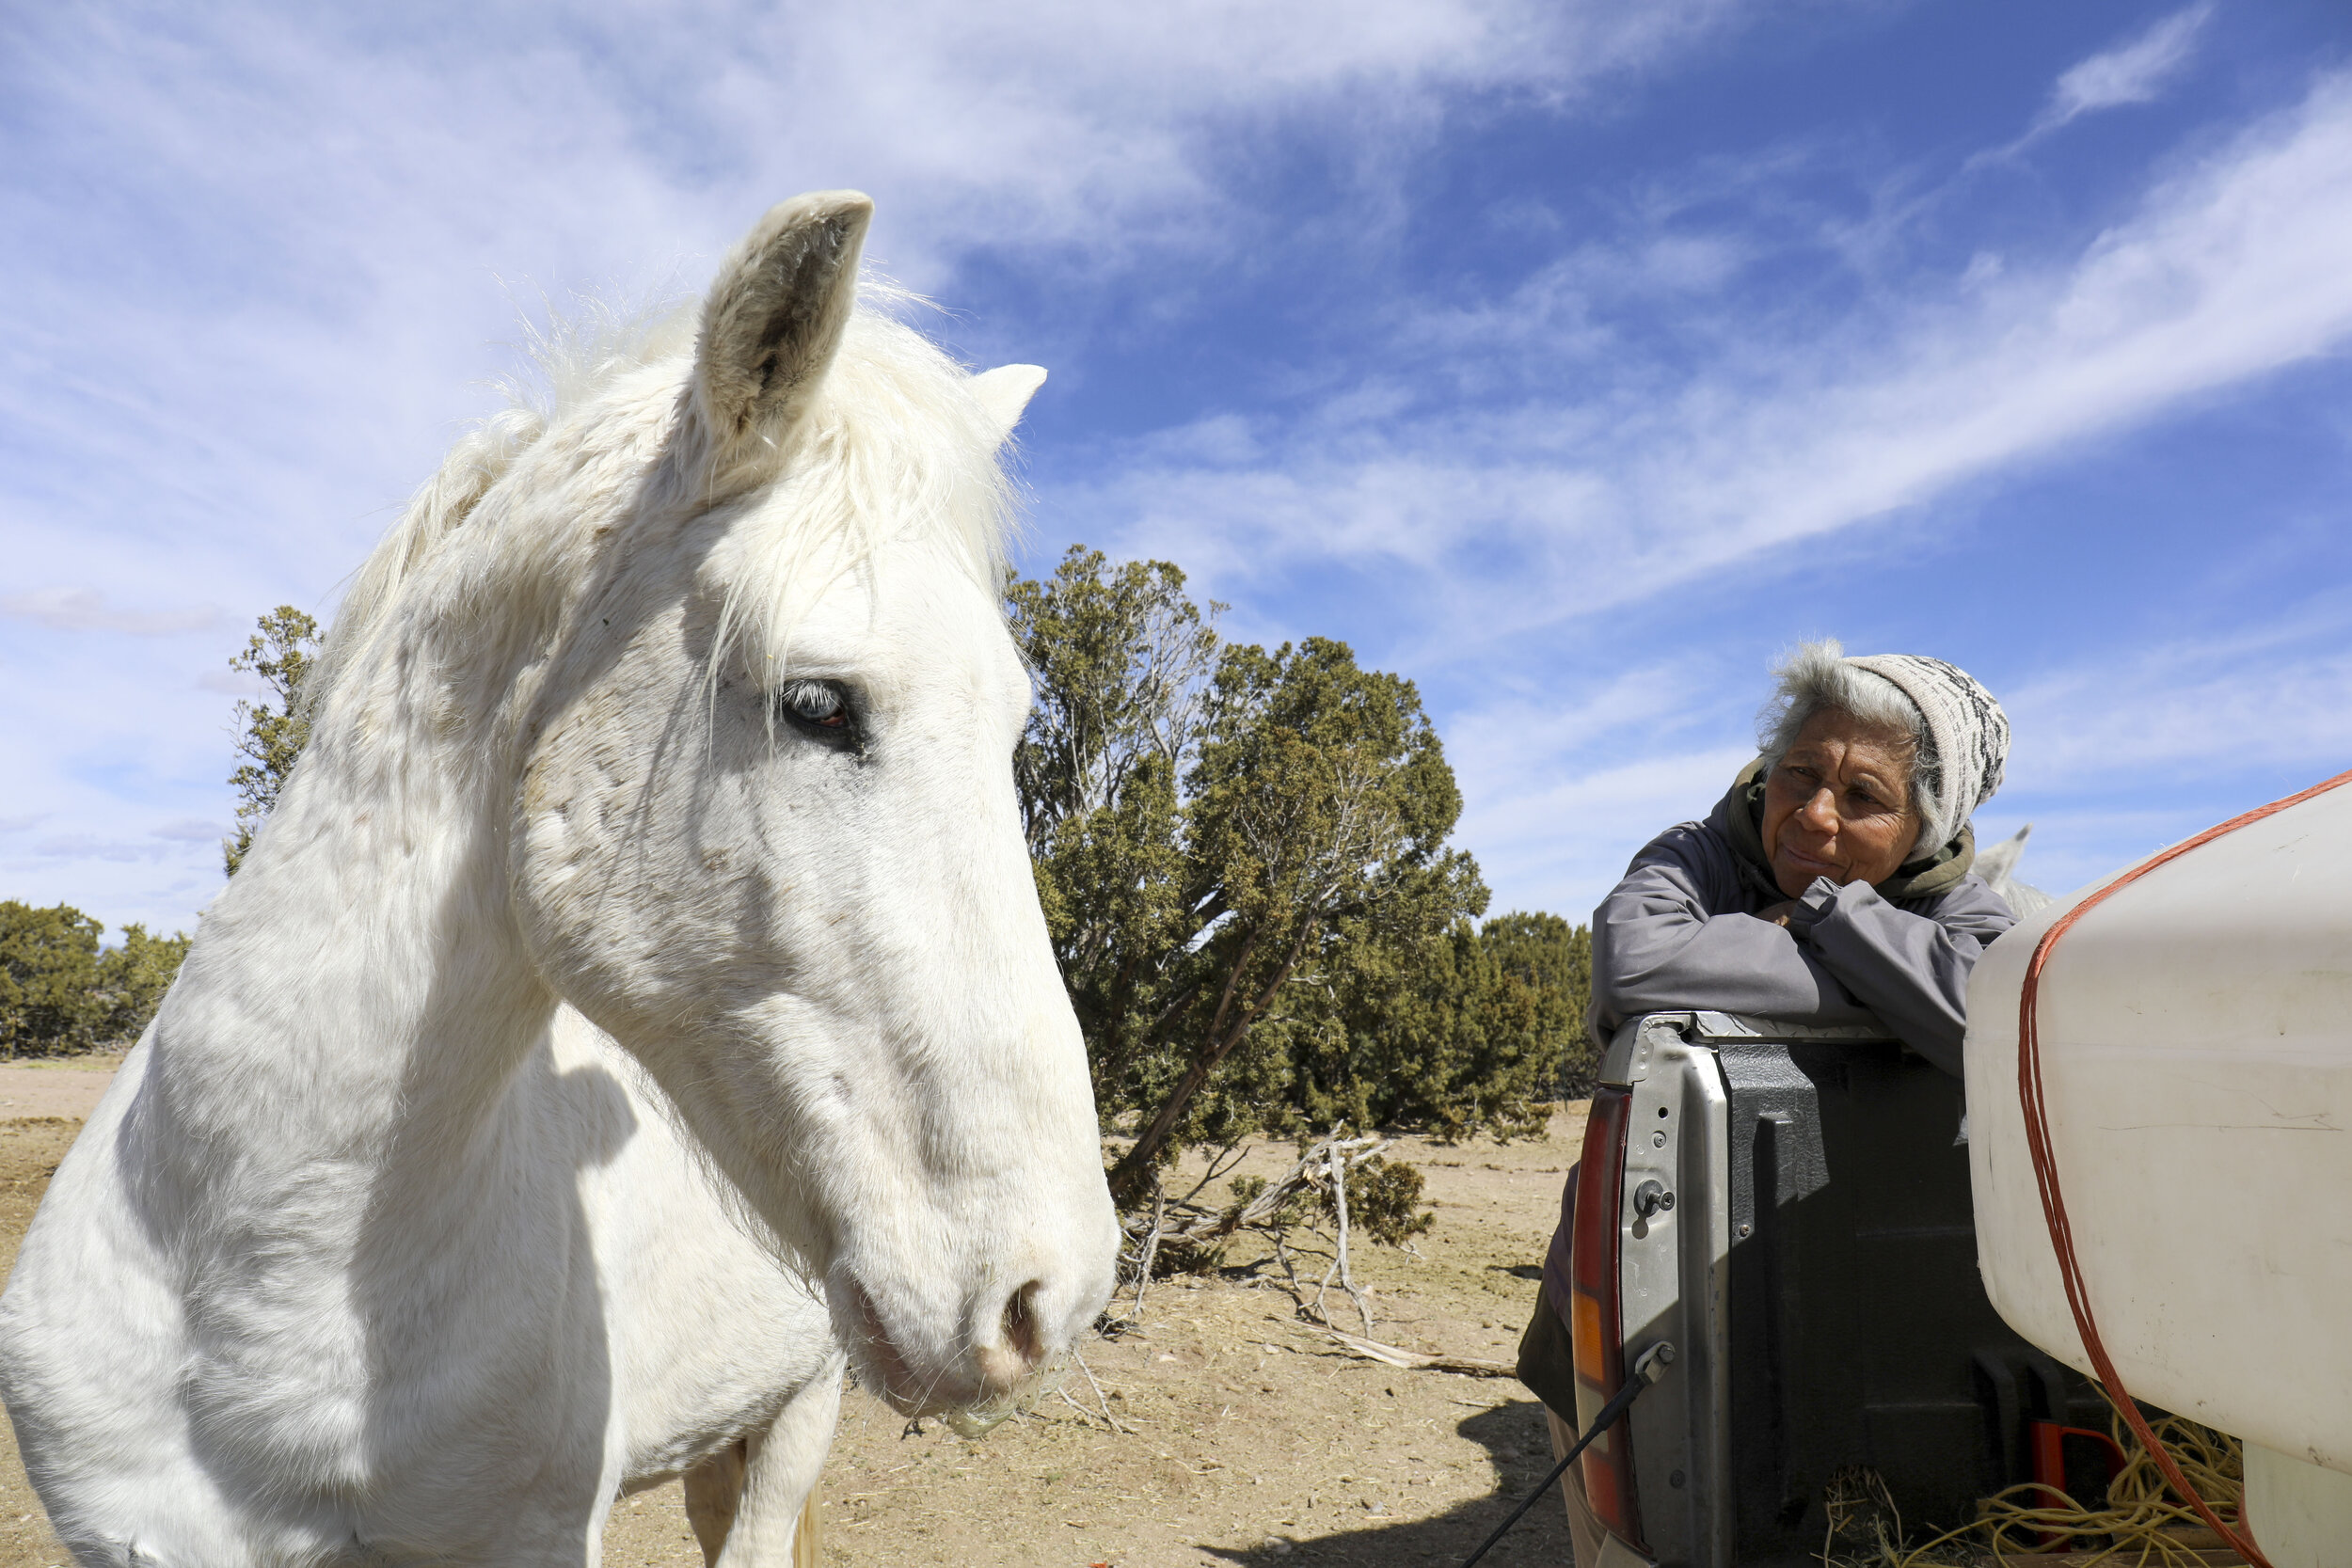  Adelina Sosa looks fondly at one of the horses she has taken care of out on the San Felipe preserve. The horse is staring at the left-over grain in the truck bed, to the right a giant water transport jug can be seen which is used by Sosa to deliver 